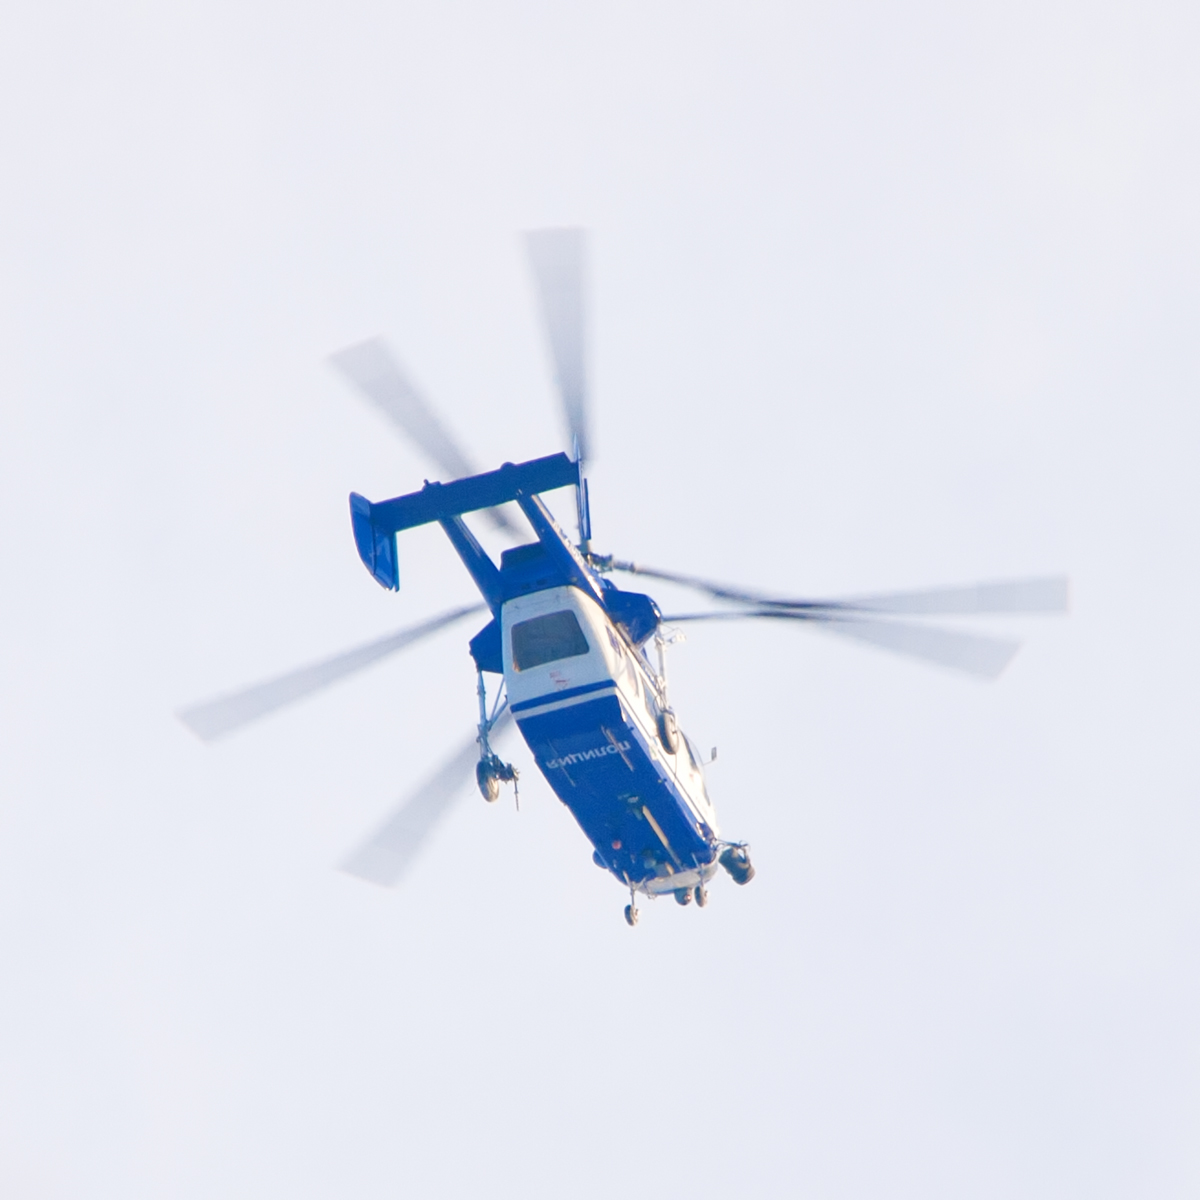 Helicopter, Aerial, Aircraft, Aviation, Emergency, HQ Photo